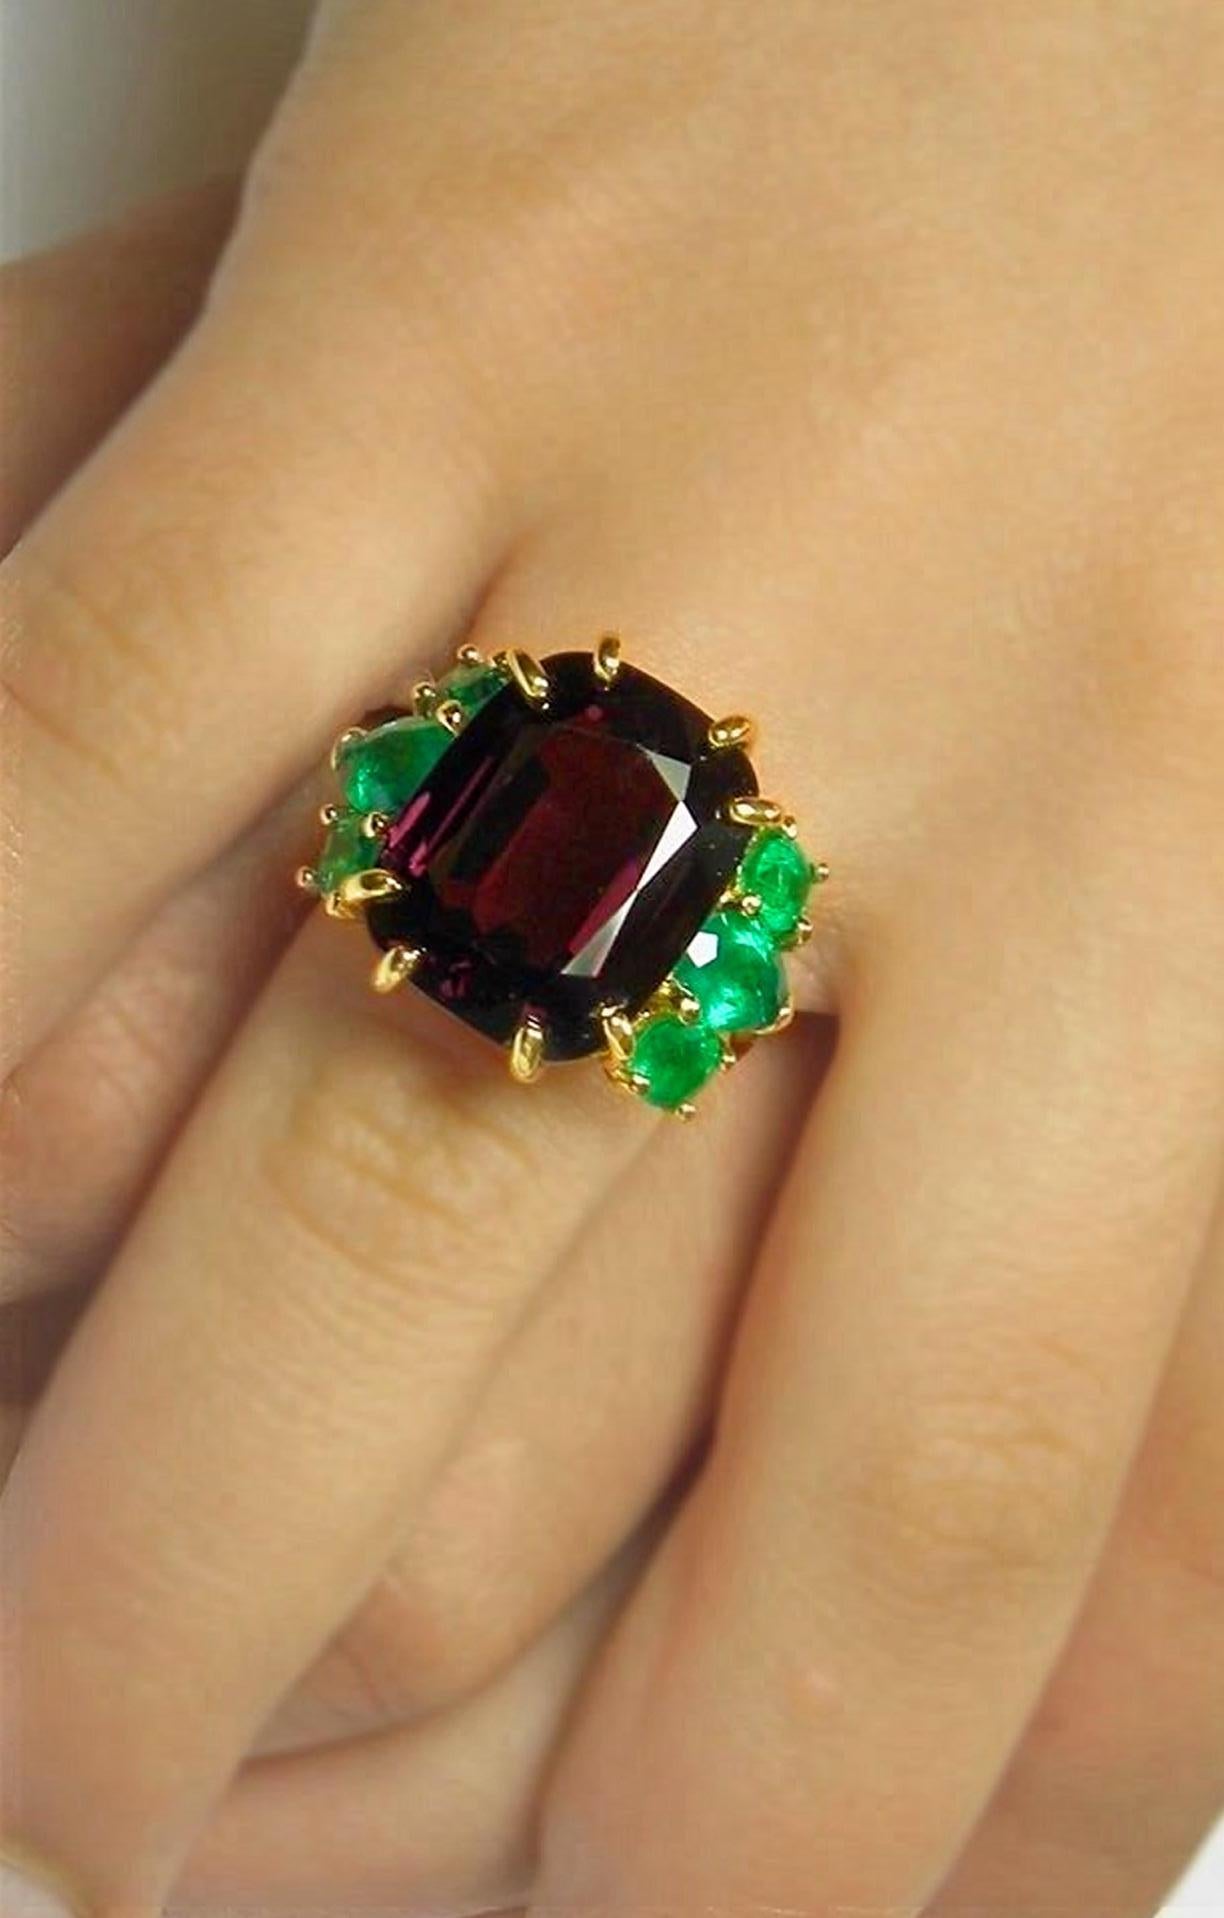 22.03ct Spinel & Emerald Untreated  18K /HEIRLOOM Retro Style Cocktail Ring
EGL USA certified 18.23 carats natural-untreated Spinel Cushion Cut Dark Red-Purplish - Clarity VS. HUGE Very Rare!
Accented with FINE natural Colombian emerald 3.80ct